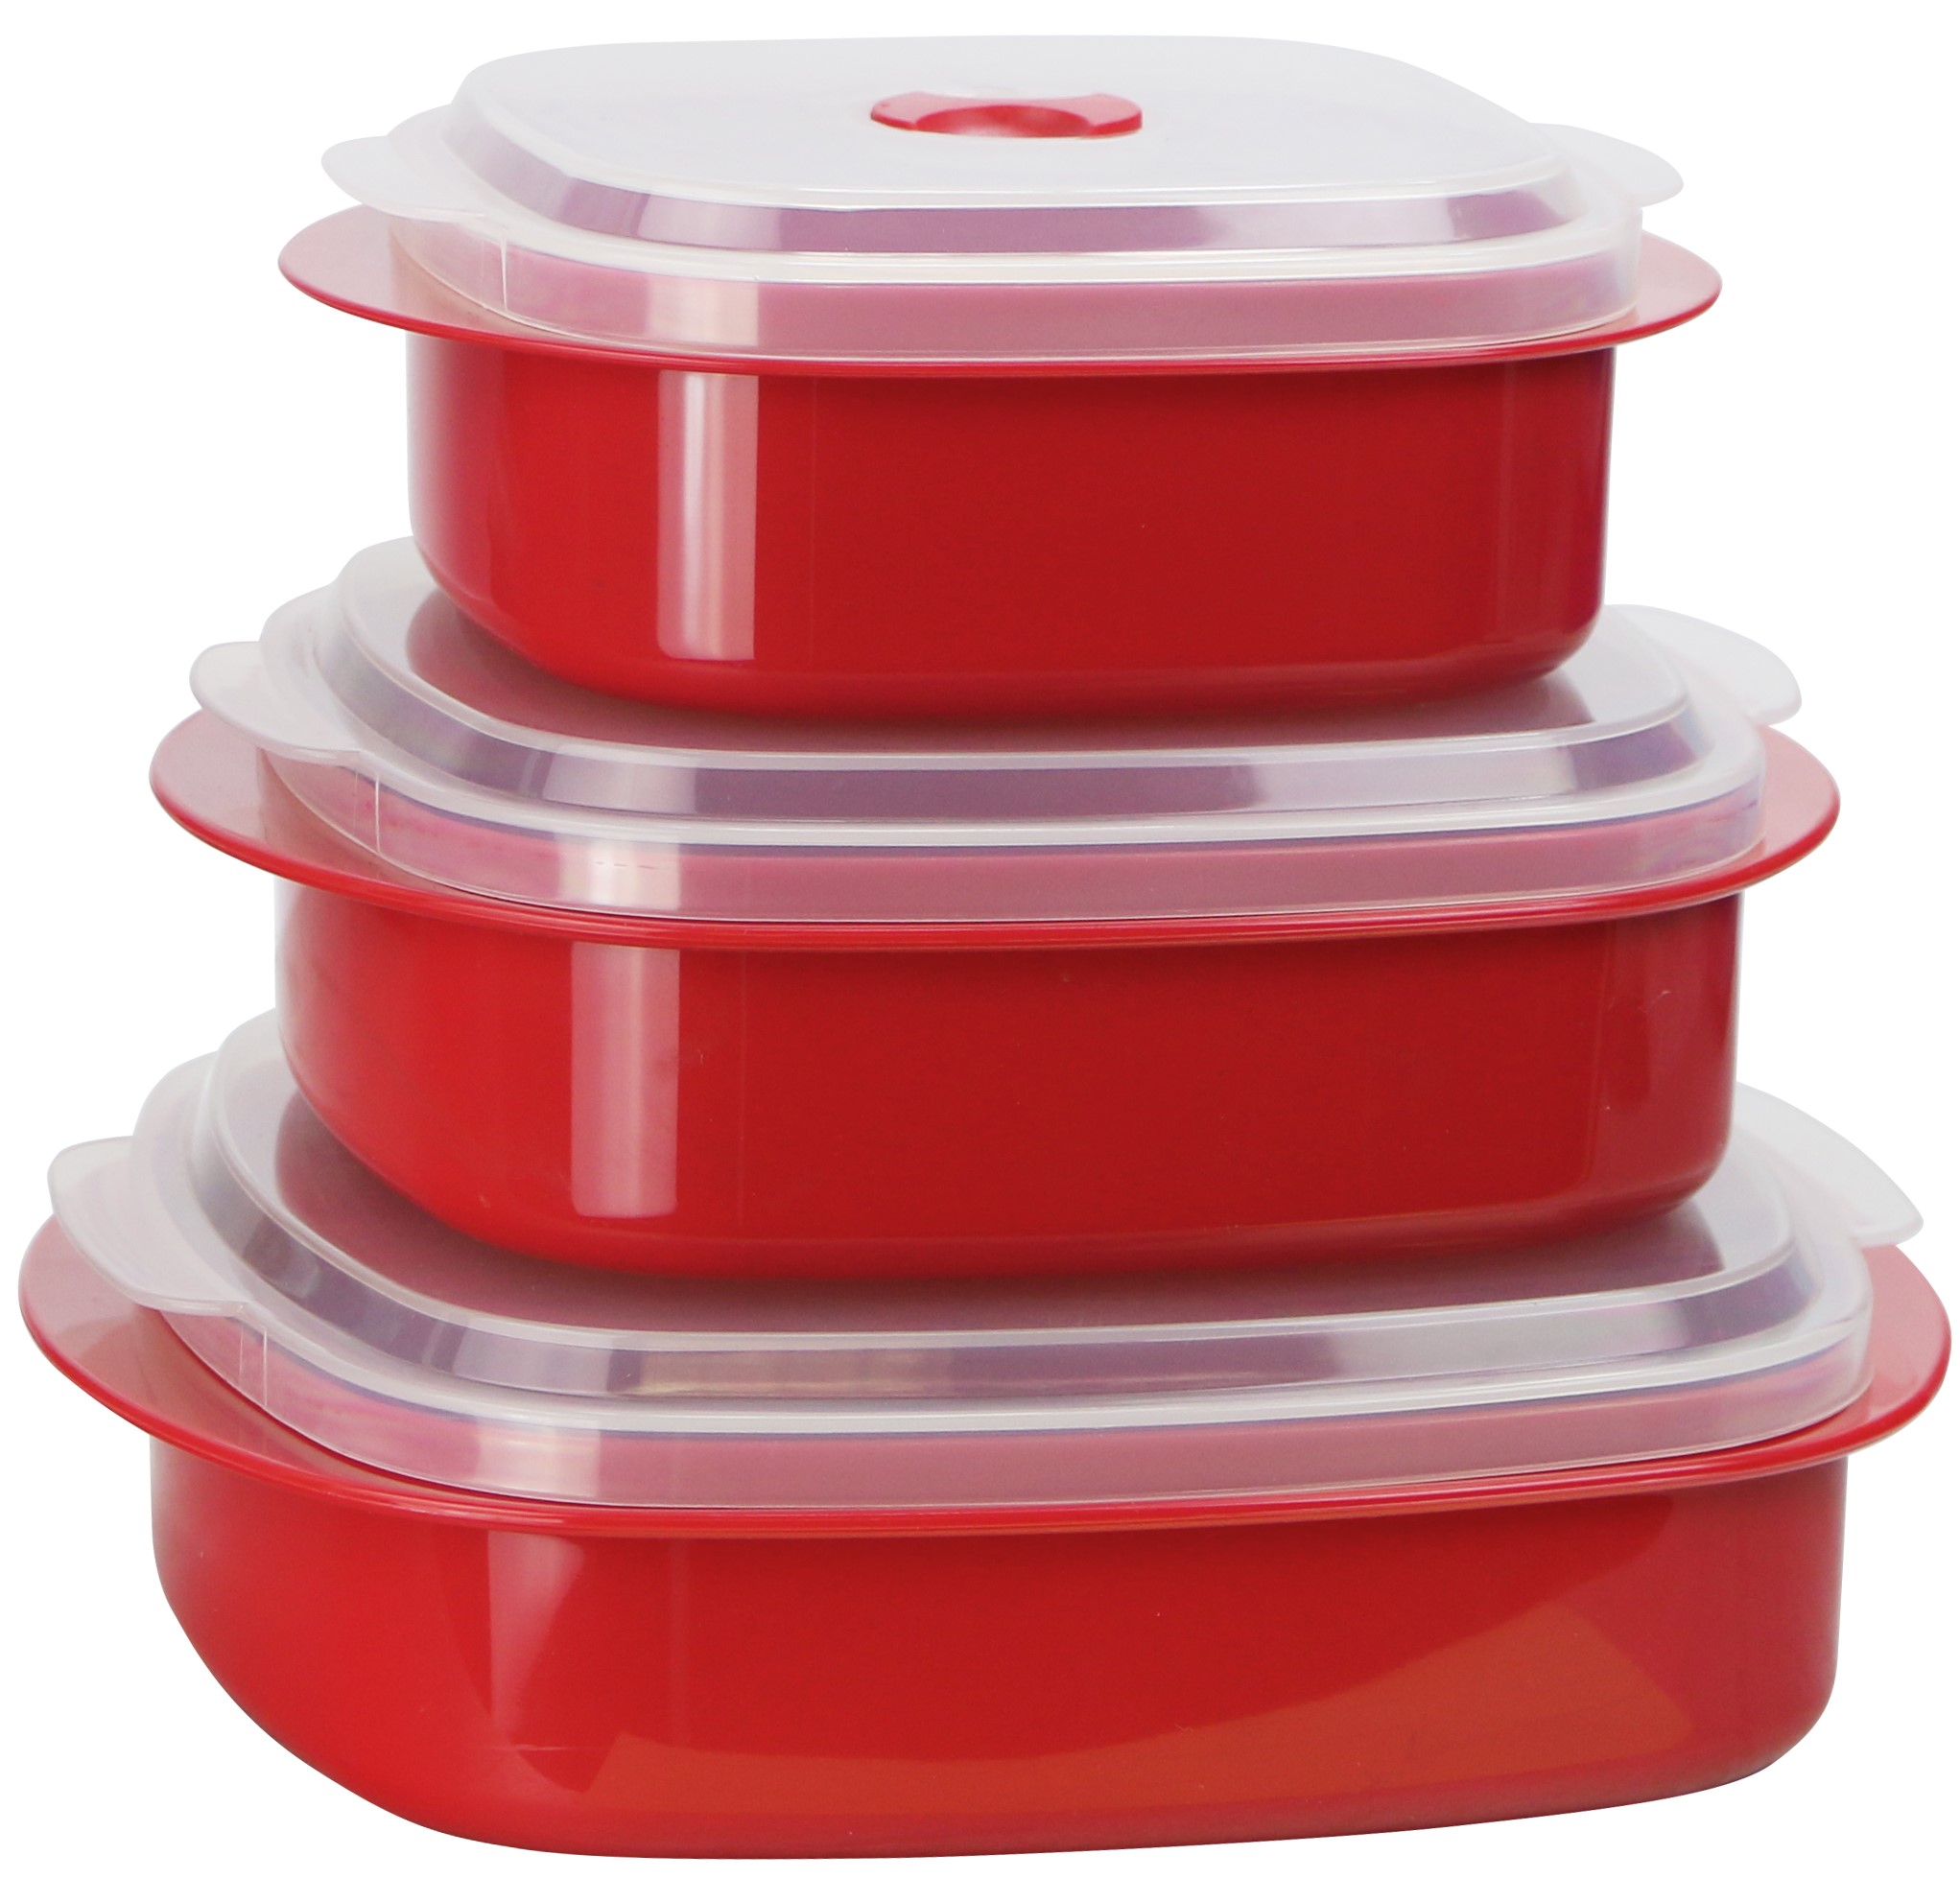 Reston Lloyd 20600 Microwave Cookware Set  Red